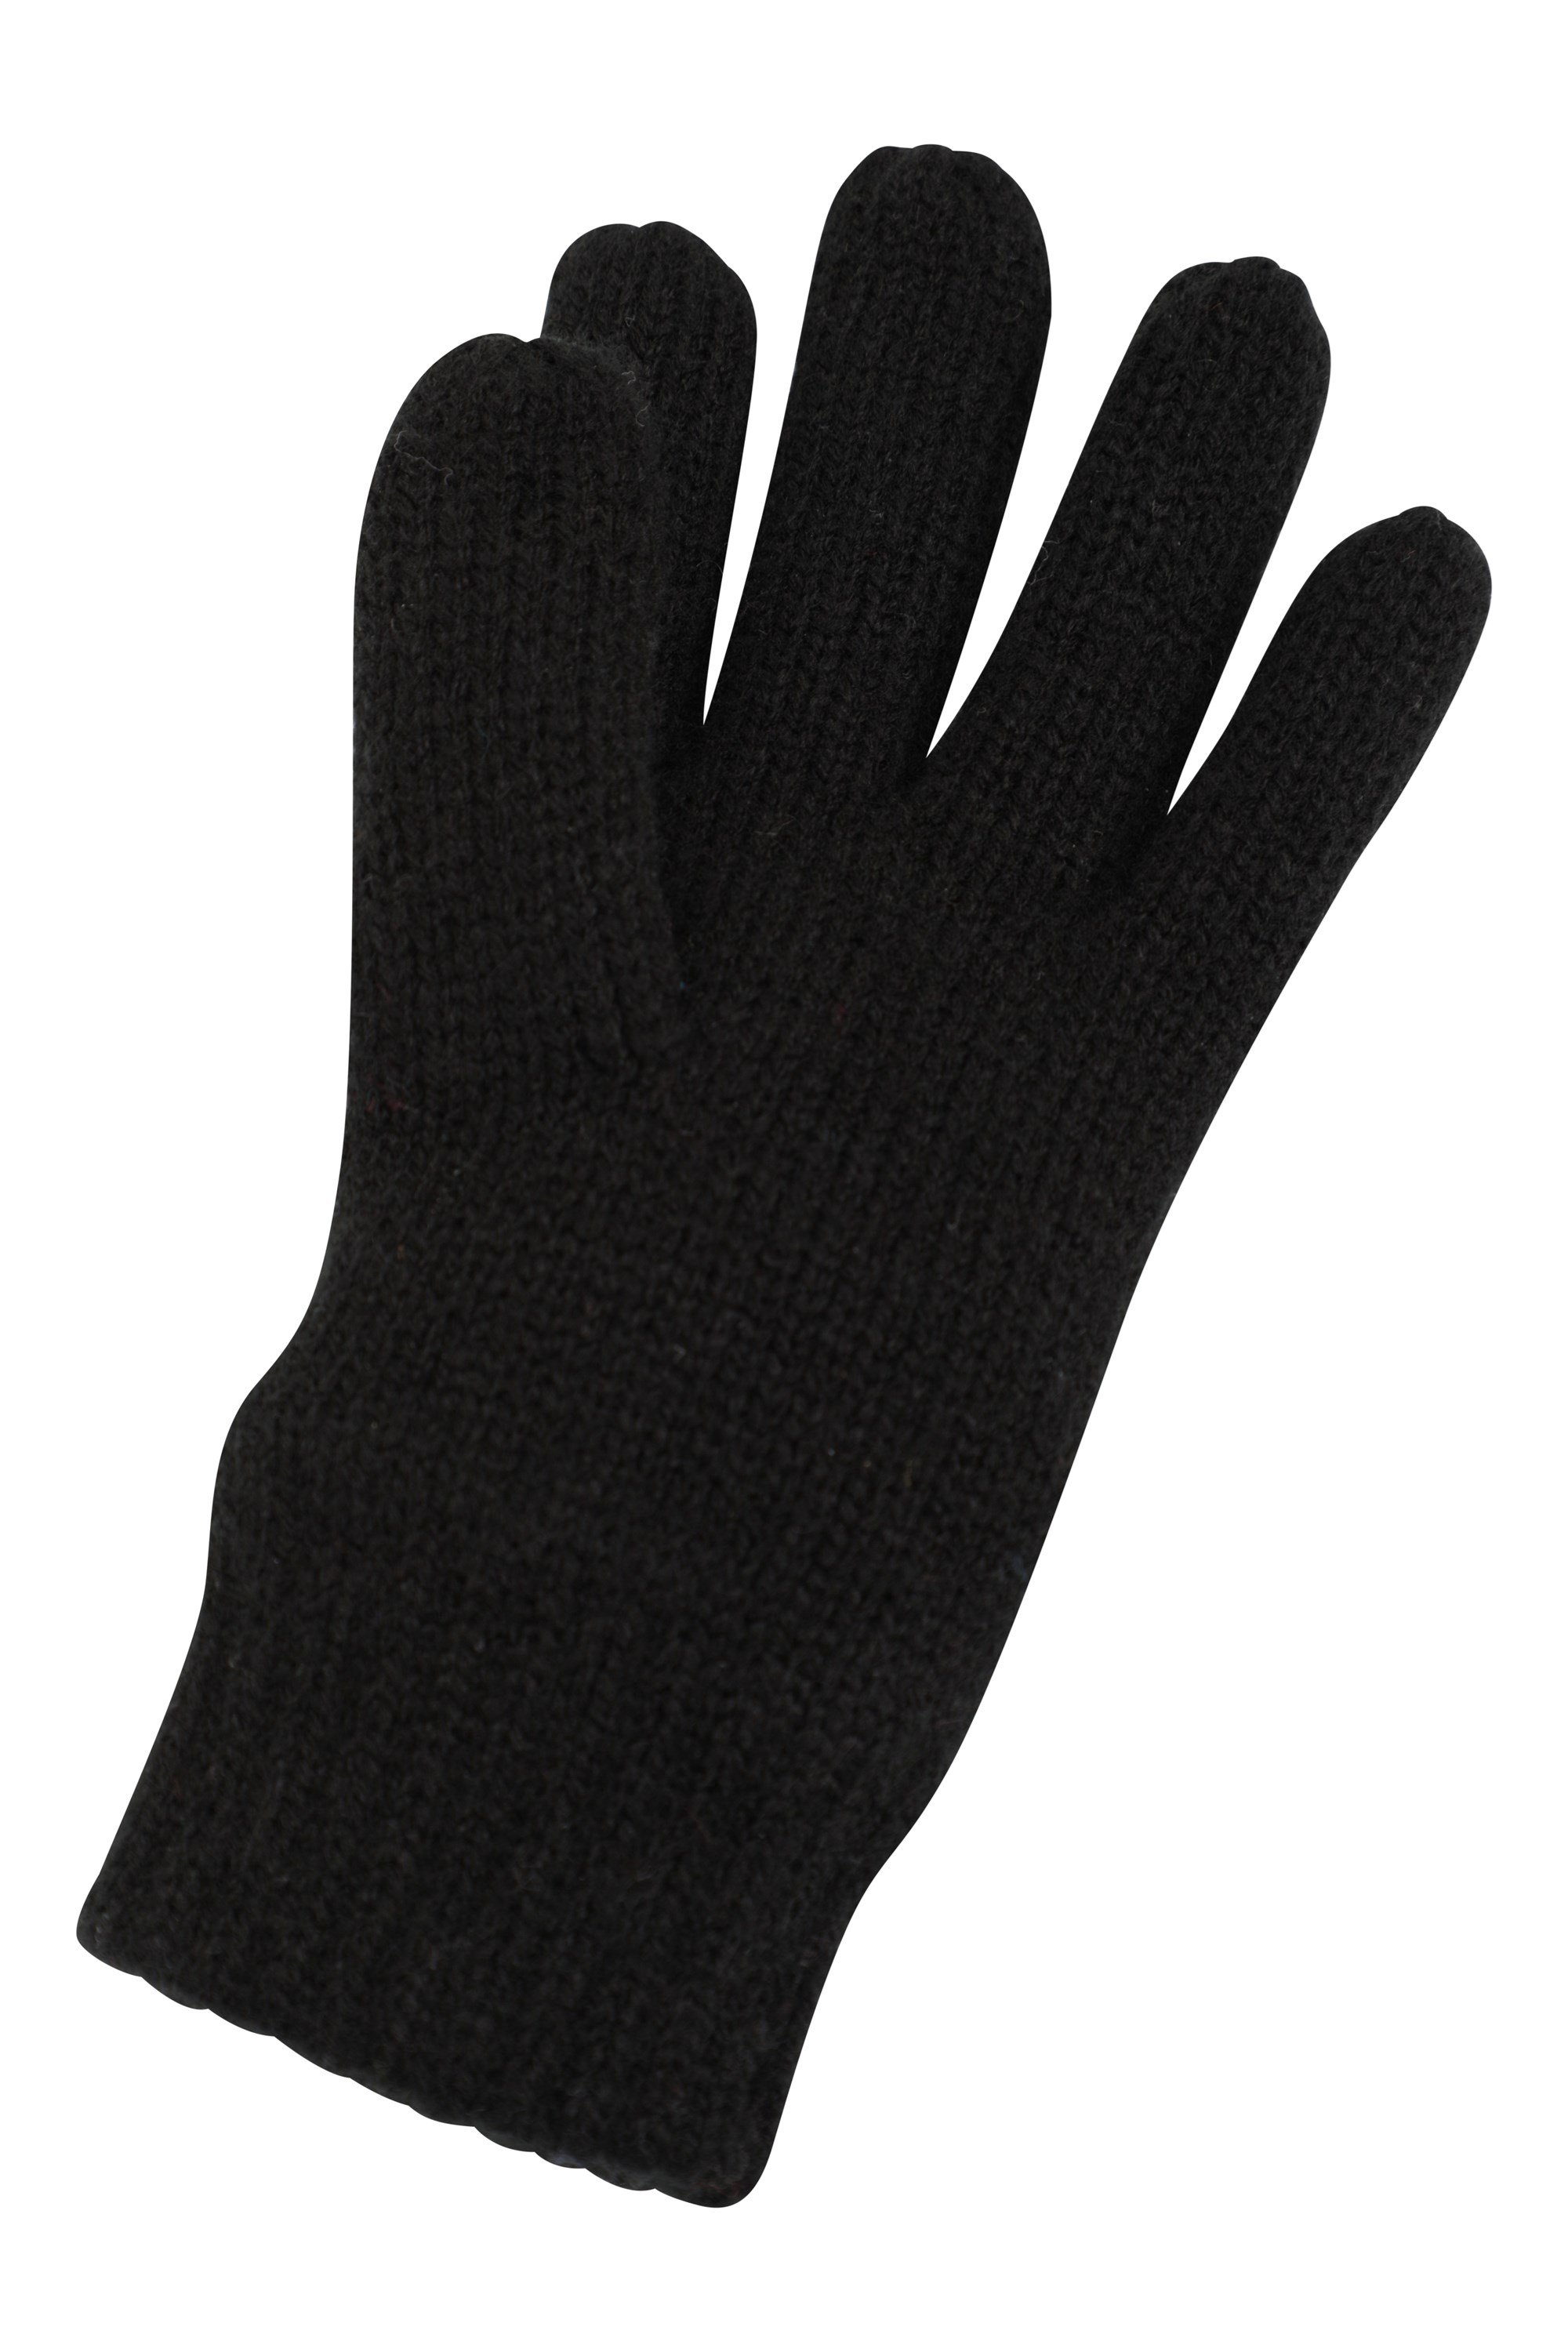 | Knitted Mountain Kids Warehouse Thinsulate Thermal Gloves US